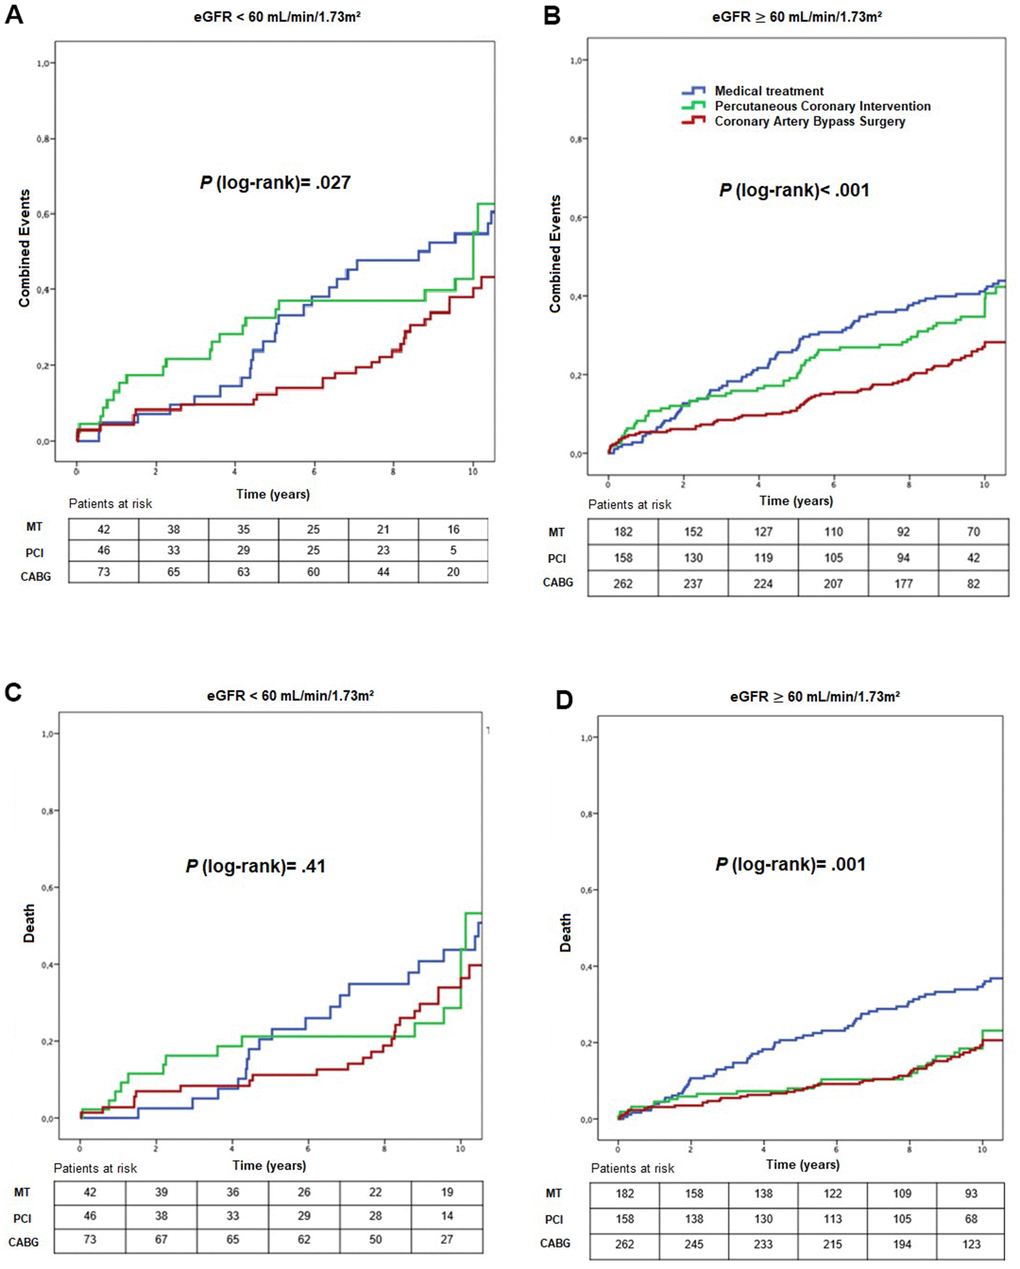 Kaplan-Meier curves showing combined events (A, B) and death (C, D), according to CKD status and treatment group. CABG, coronary artery bypass surgery; eGFR, estimated glomerular filtration rate; MT, medical treatment; PCI, percutaneous coronary intervention.